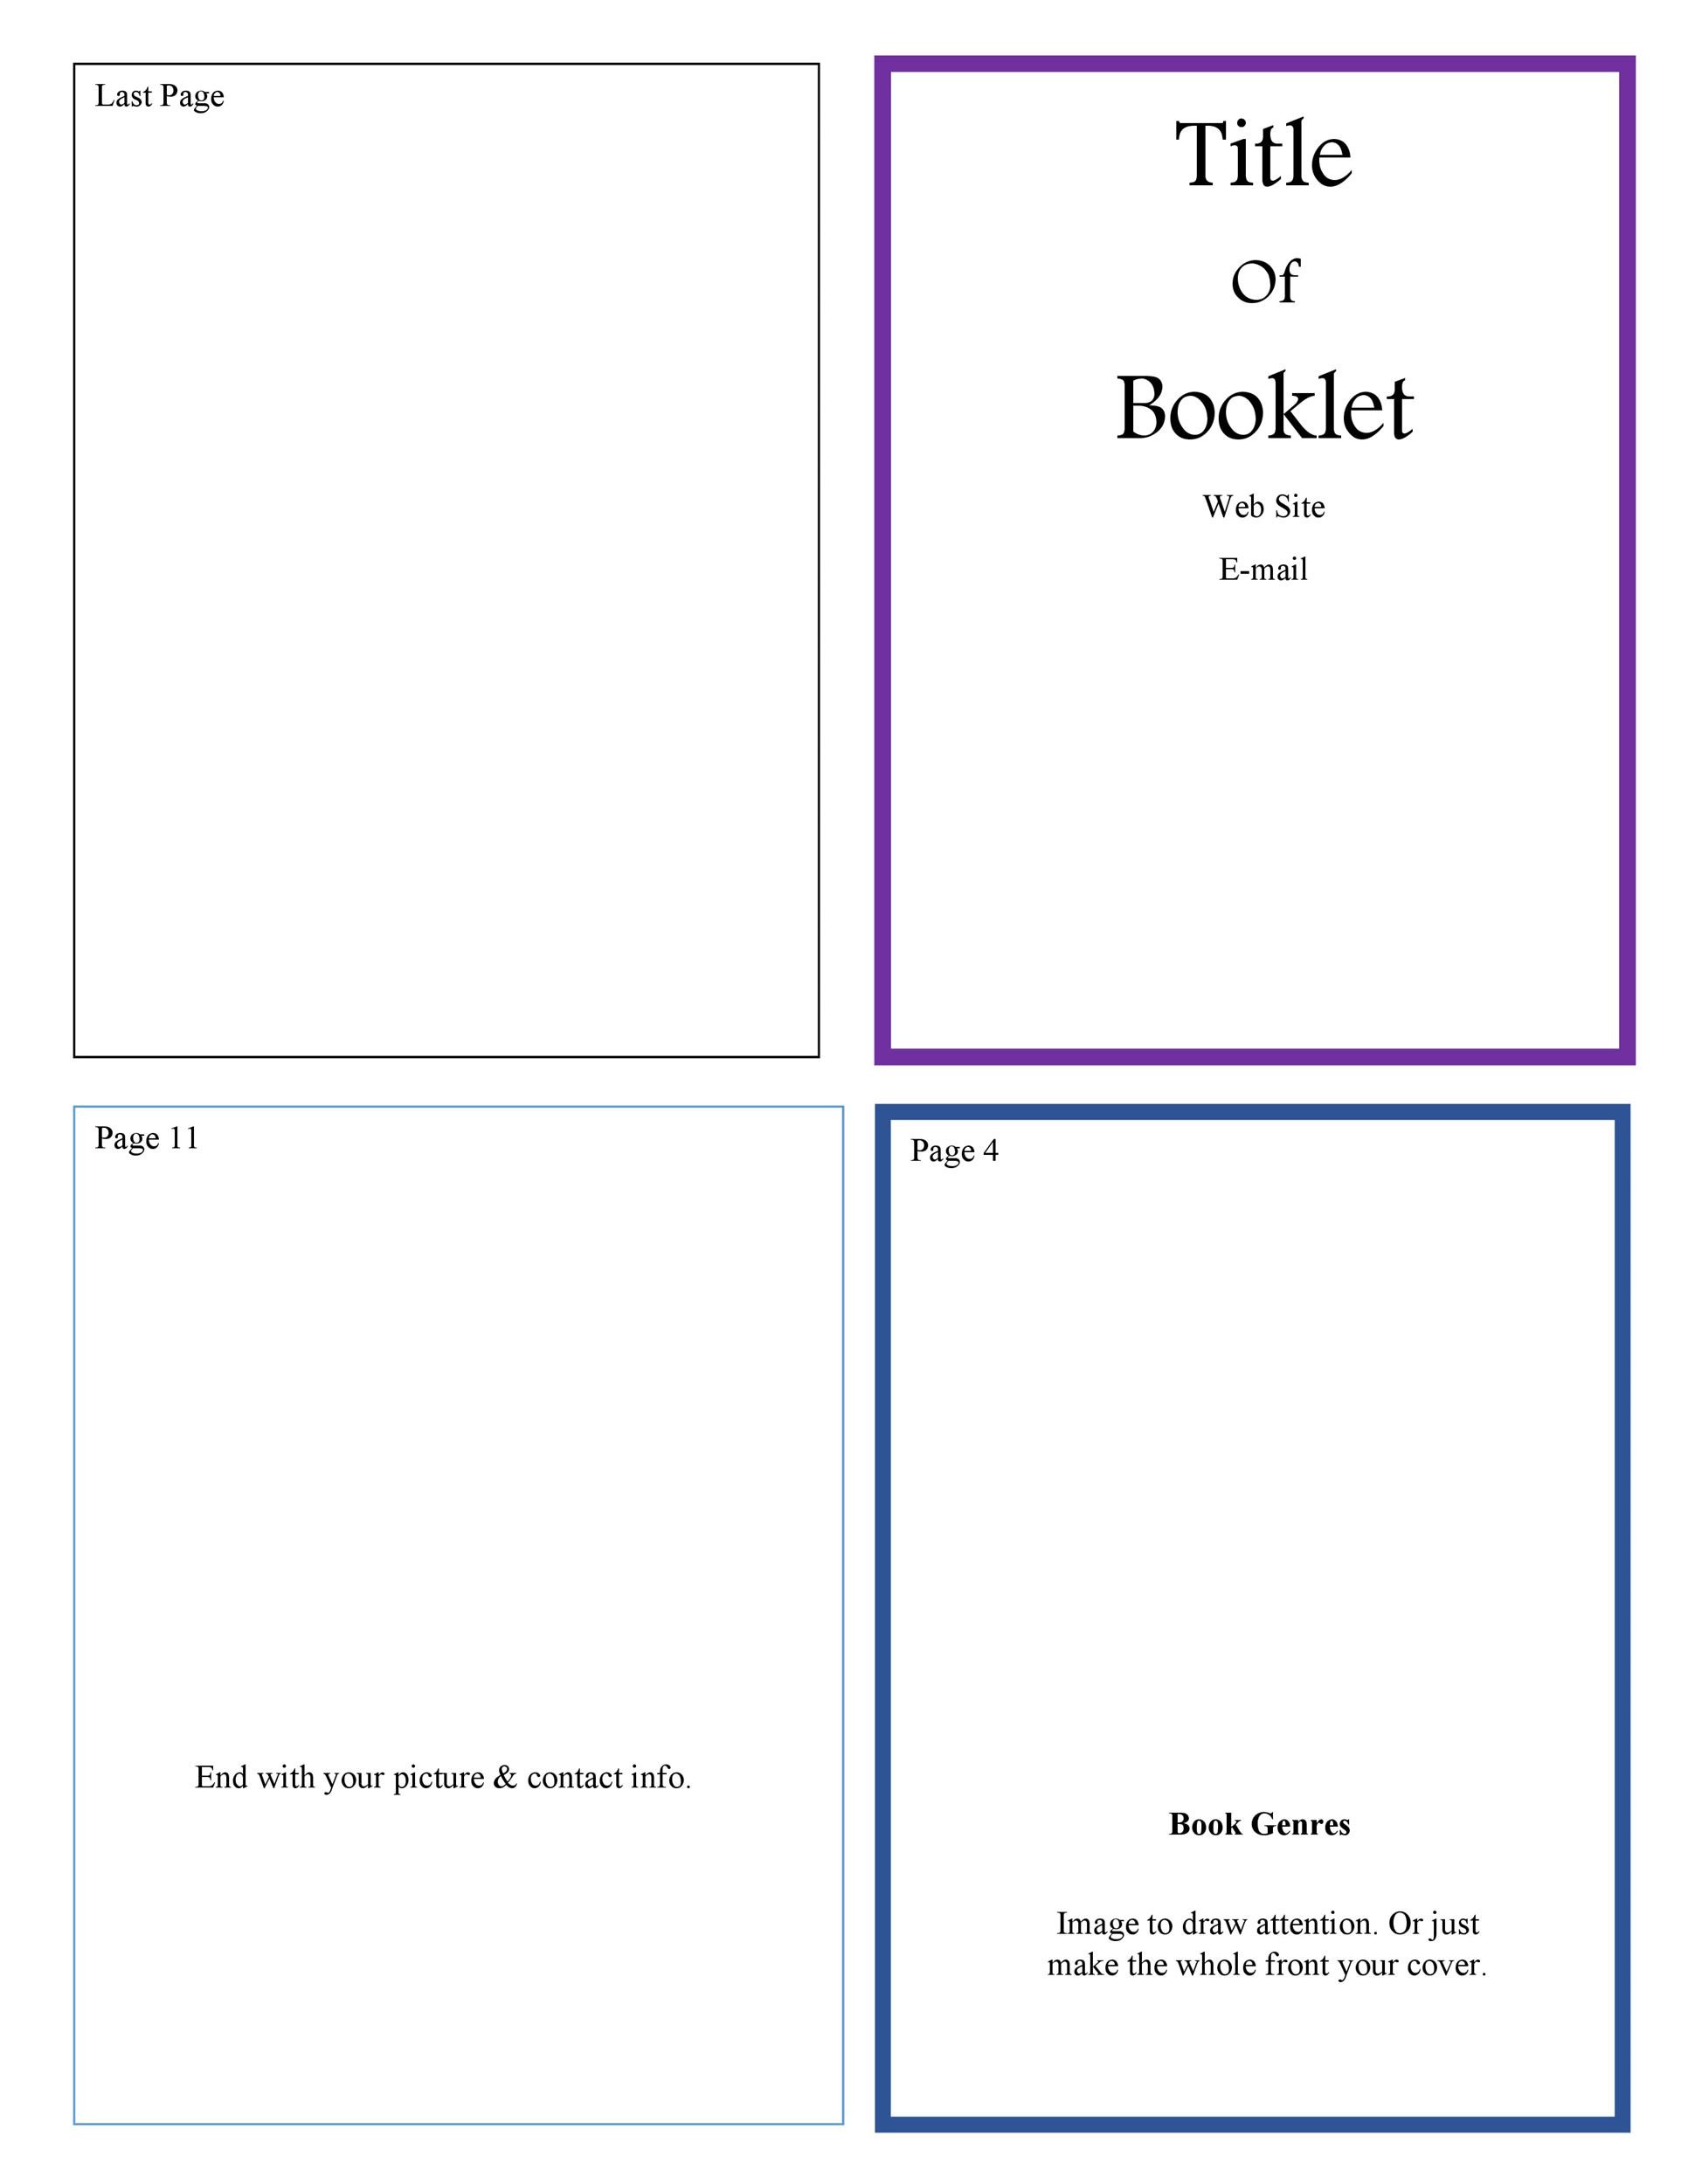 49 Free Booklet Templates Designs MS Word TemplateLab